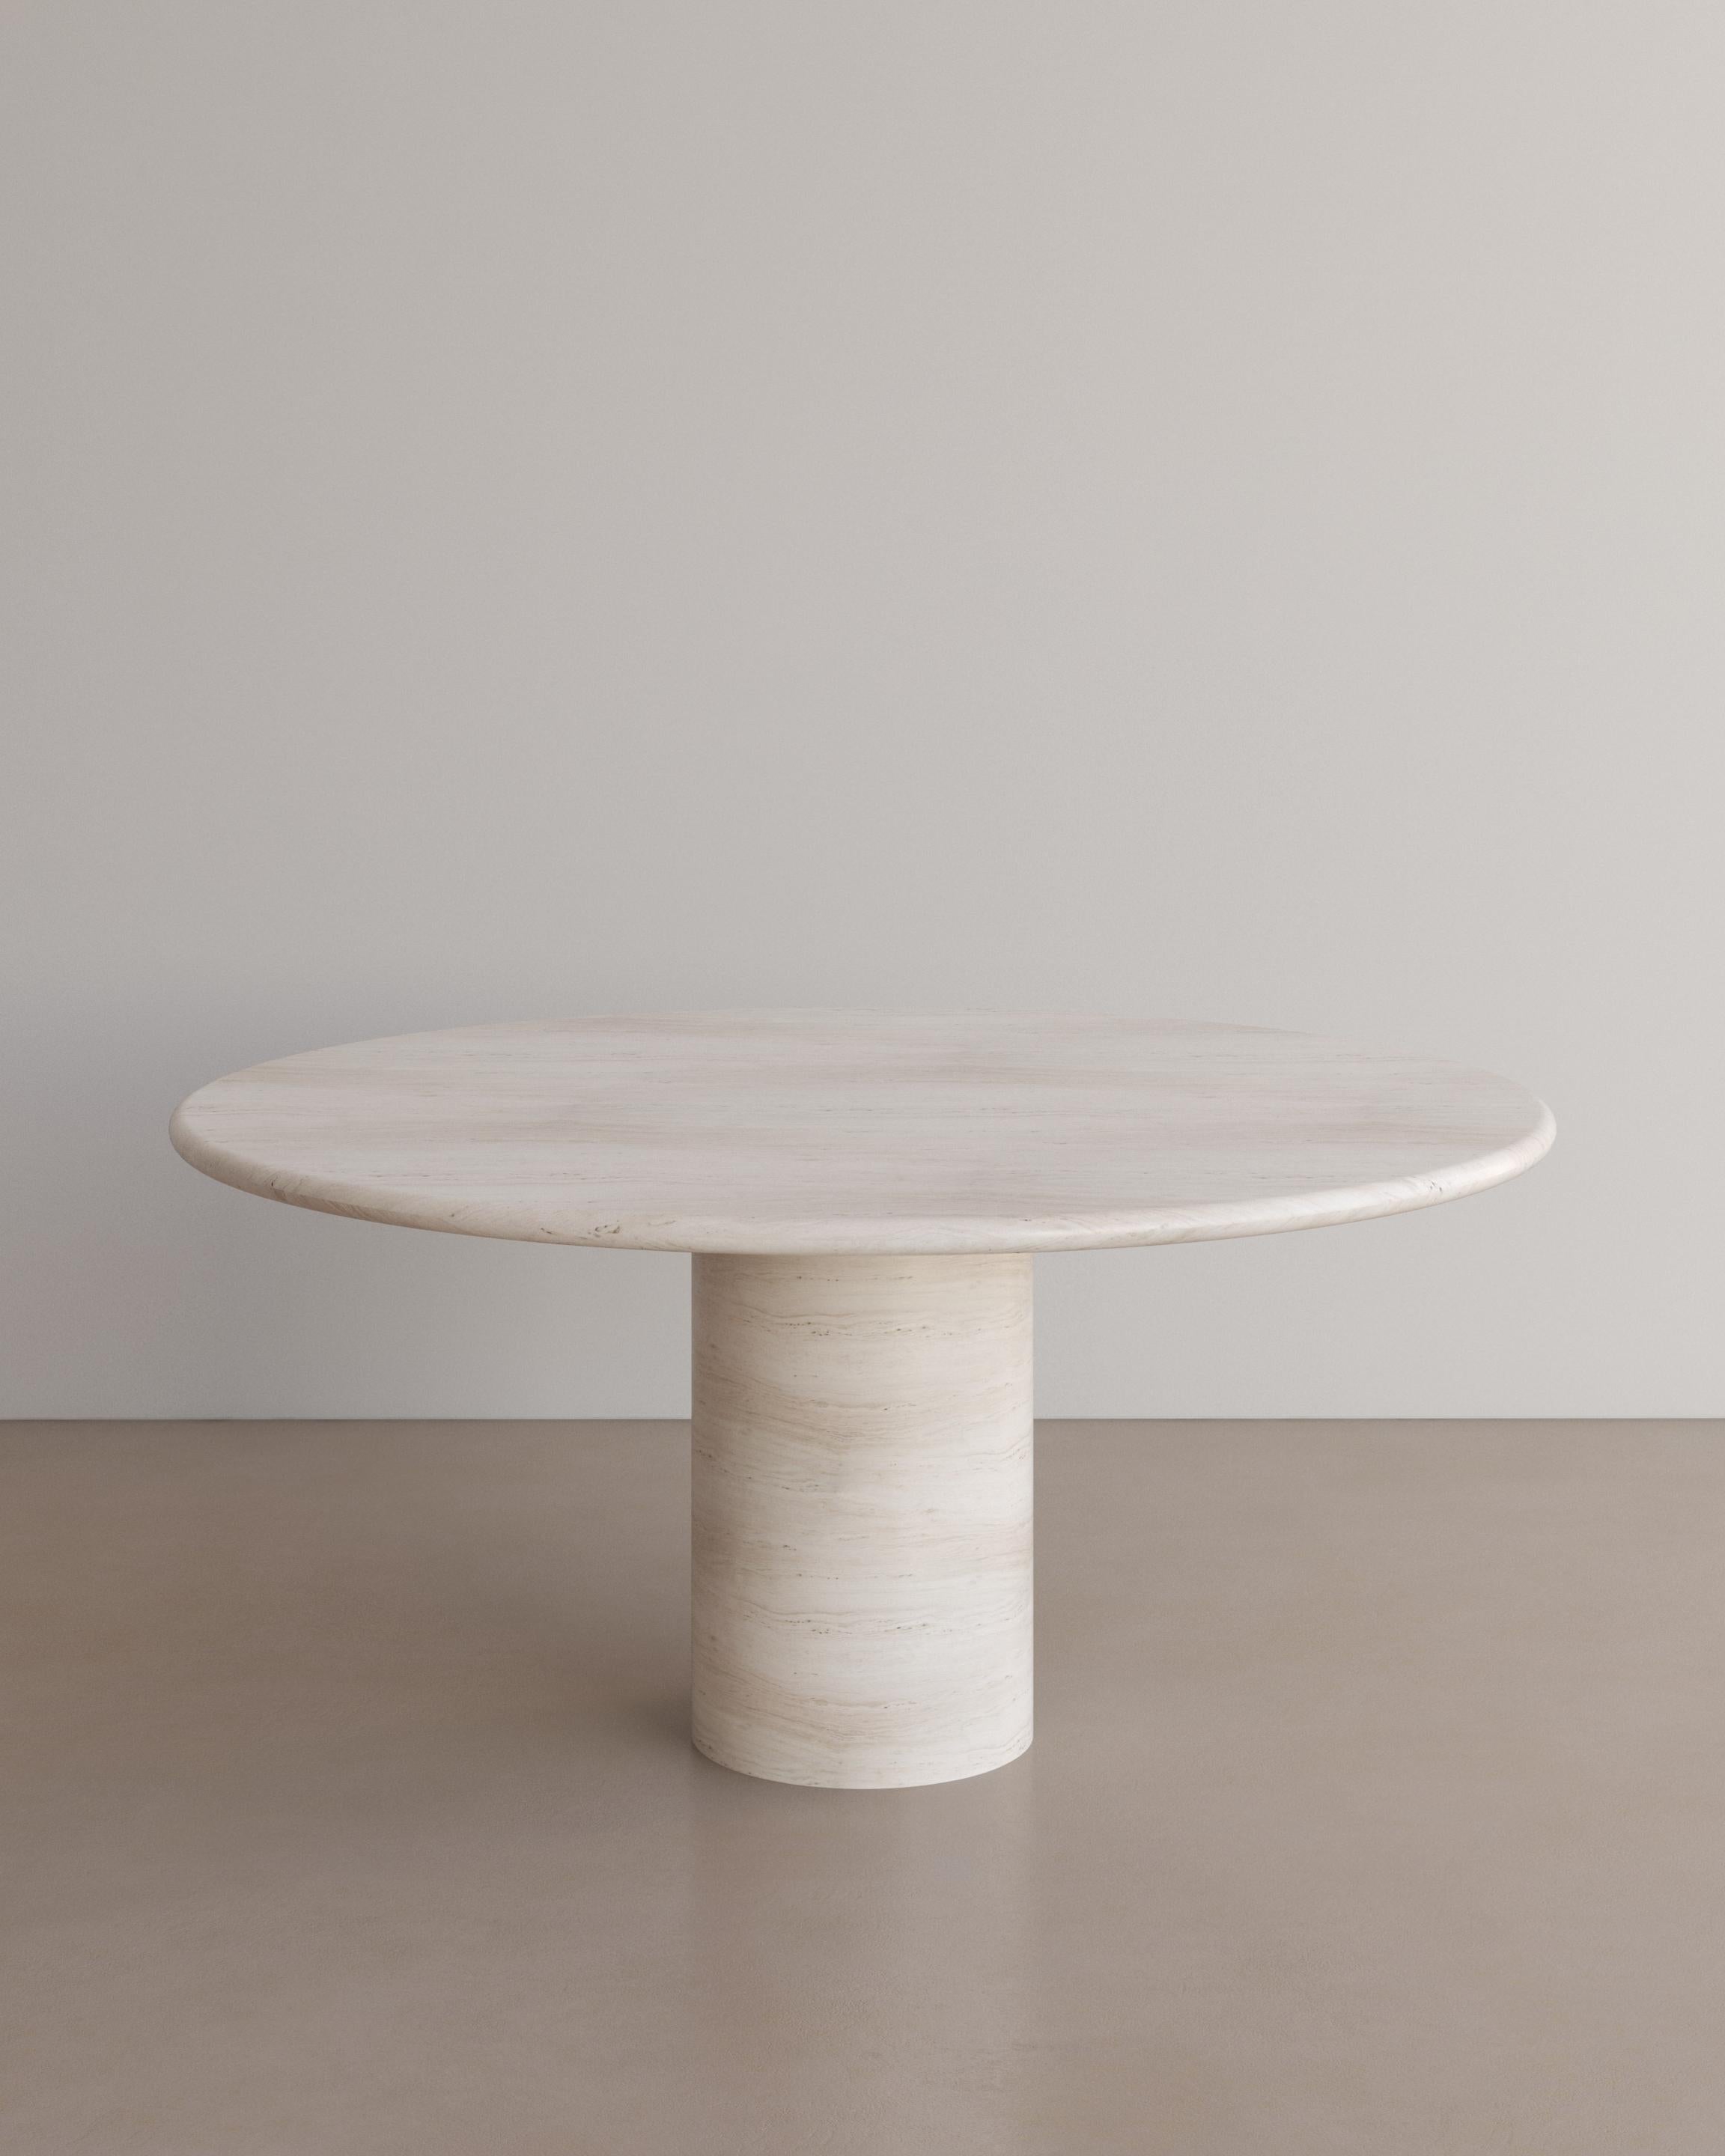 The Voyage Dining Table I in Bianco Travertine by The Essentialist celebrates the simple pleasures that define life and replenish the soul through harnessing essential form. Envisioned as an ode to historical elegance, captured through a modern lens